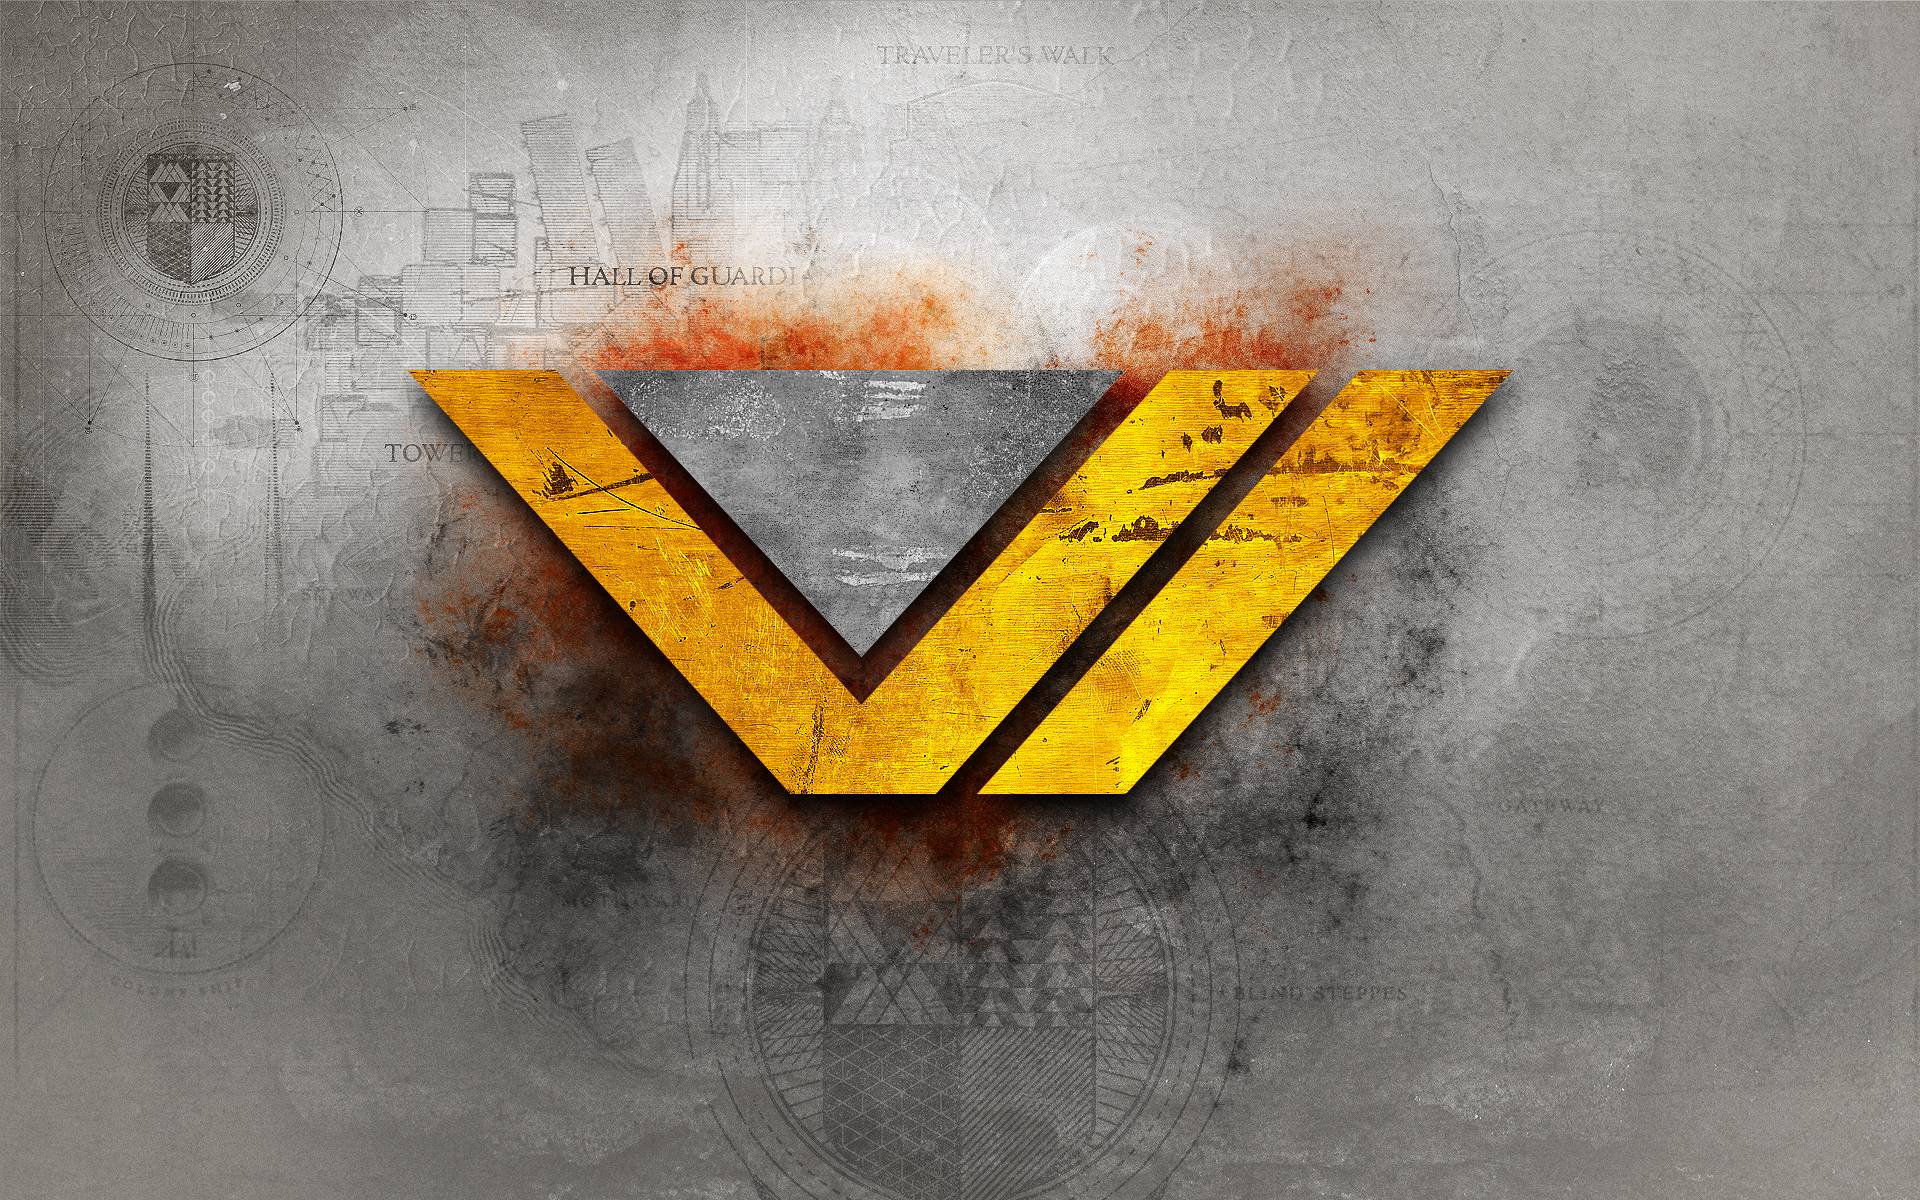 Destiny Wallpaper Series continues with the Vanguard